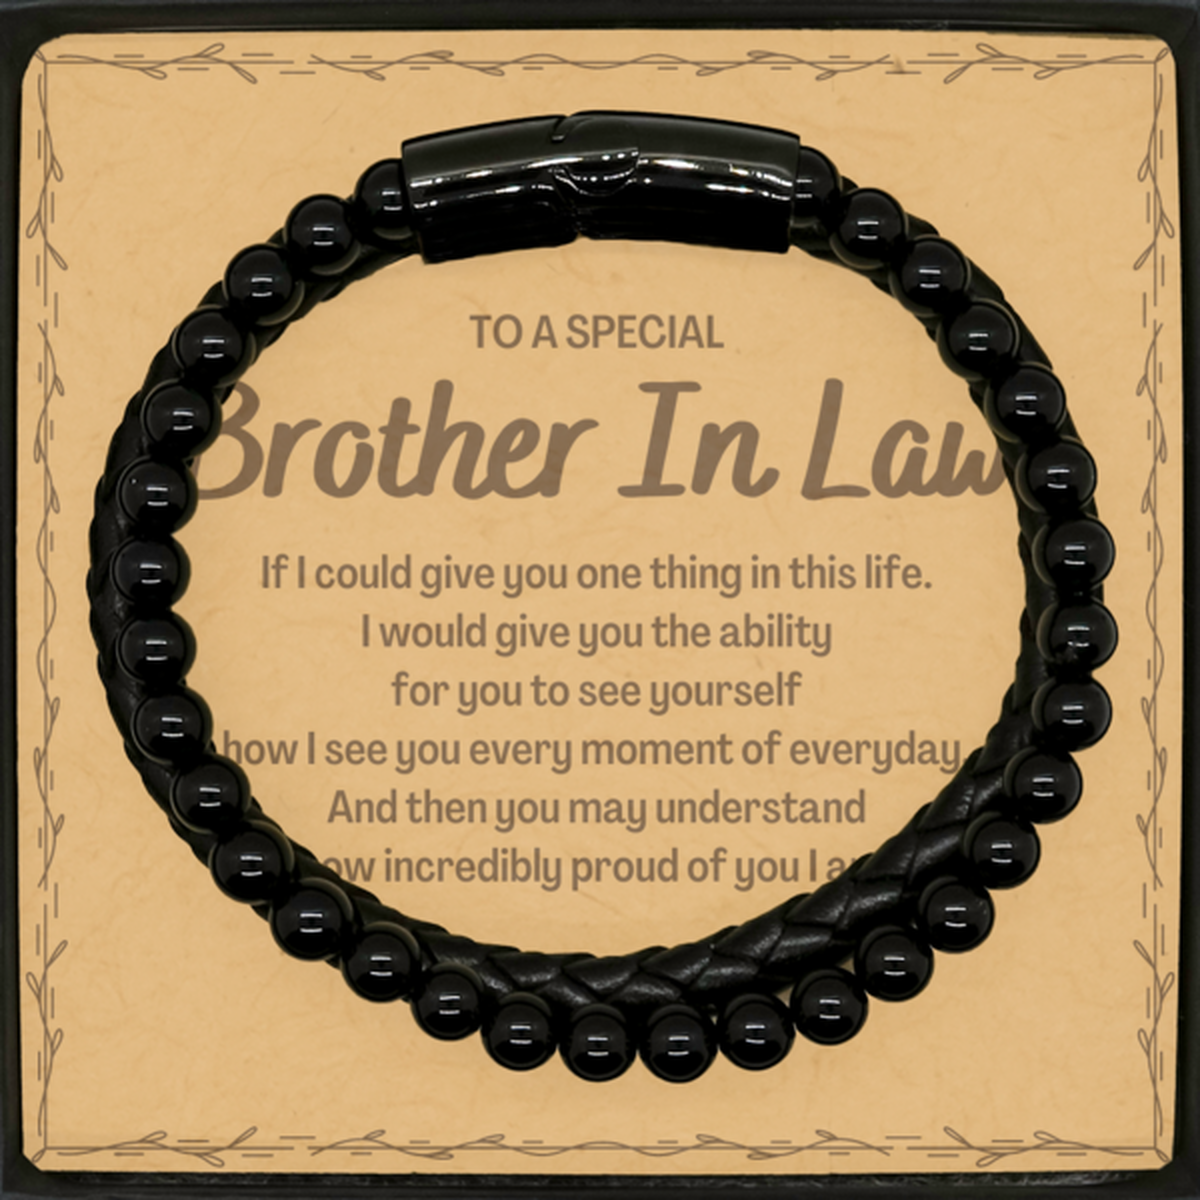 To My Brother In Law Stone Leather Bracelets, Gifts For Brother In Law Message Card, Inspirational Gifts for Christmas Birthday, Epic Gifts for Brother In Law To A Special Brother In Law how incredibly proud of you I am